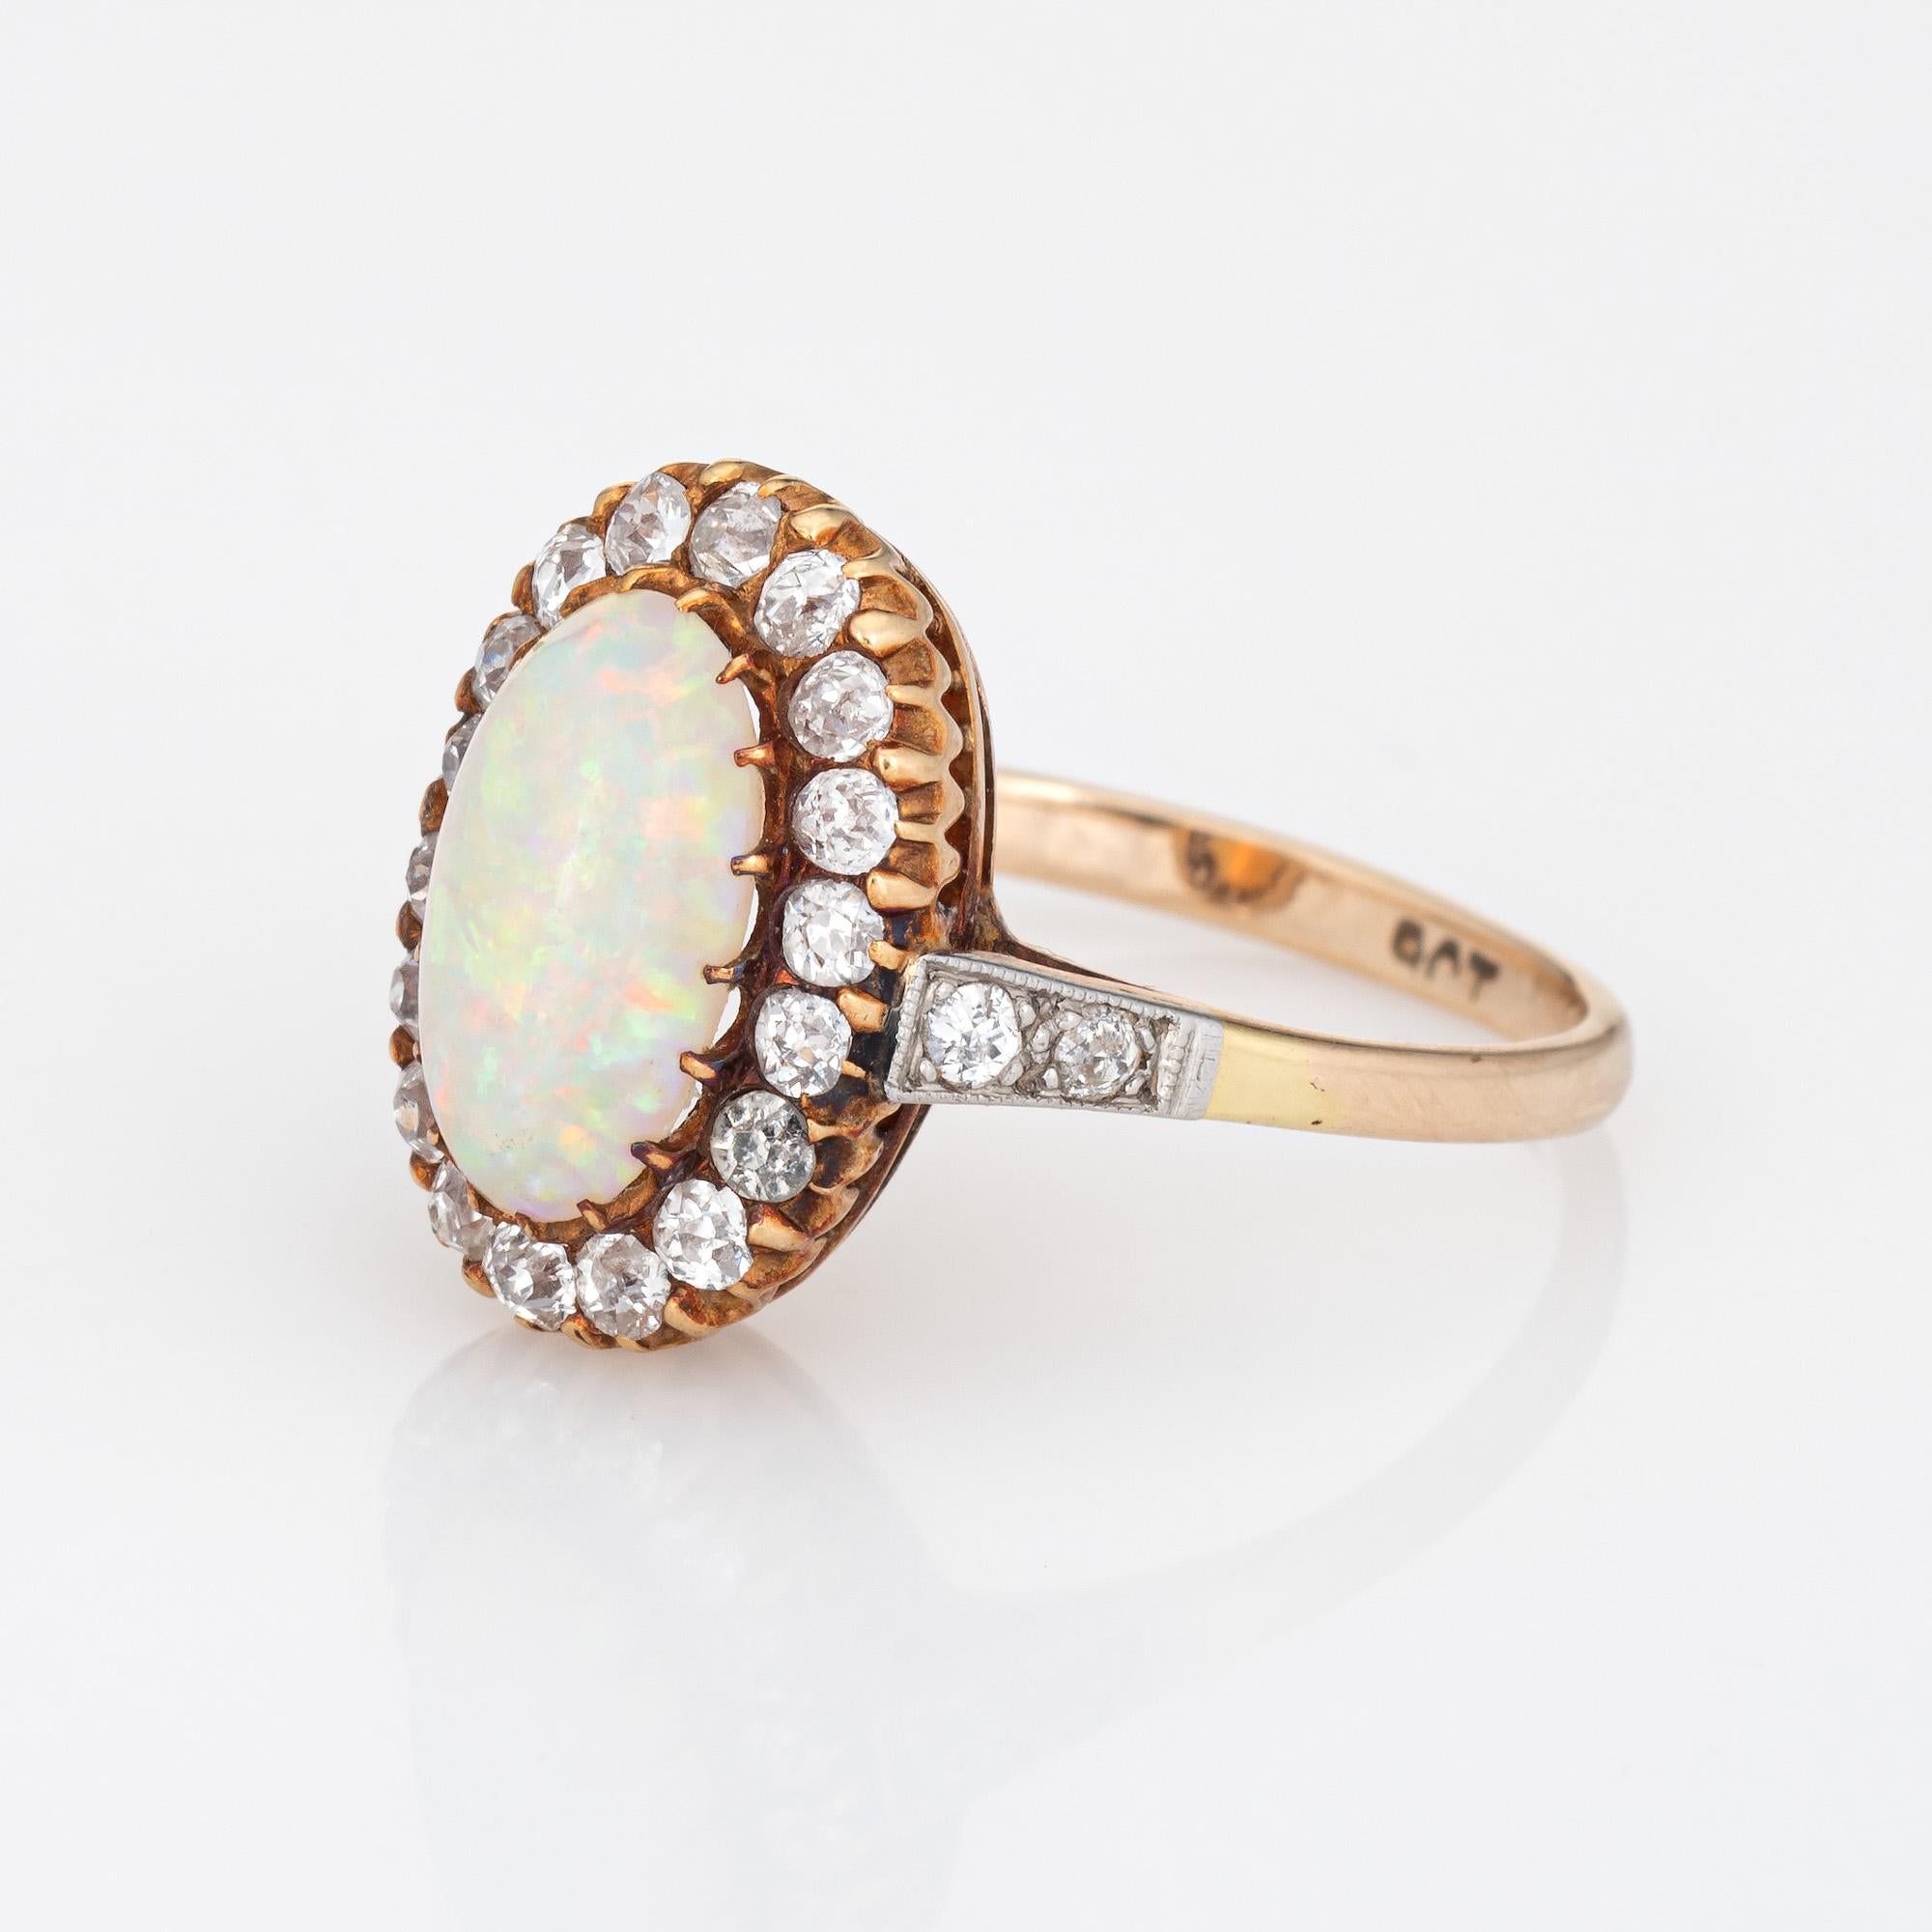 Antique Victorian Opal Diamond Ring 9k Yellow Gold Oval Vintage Fine Jewelry In Good Condition For Sale In Torrance, CA